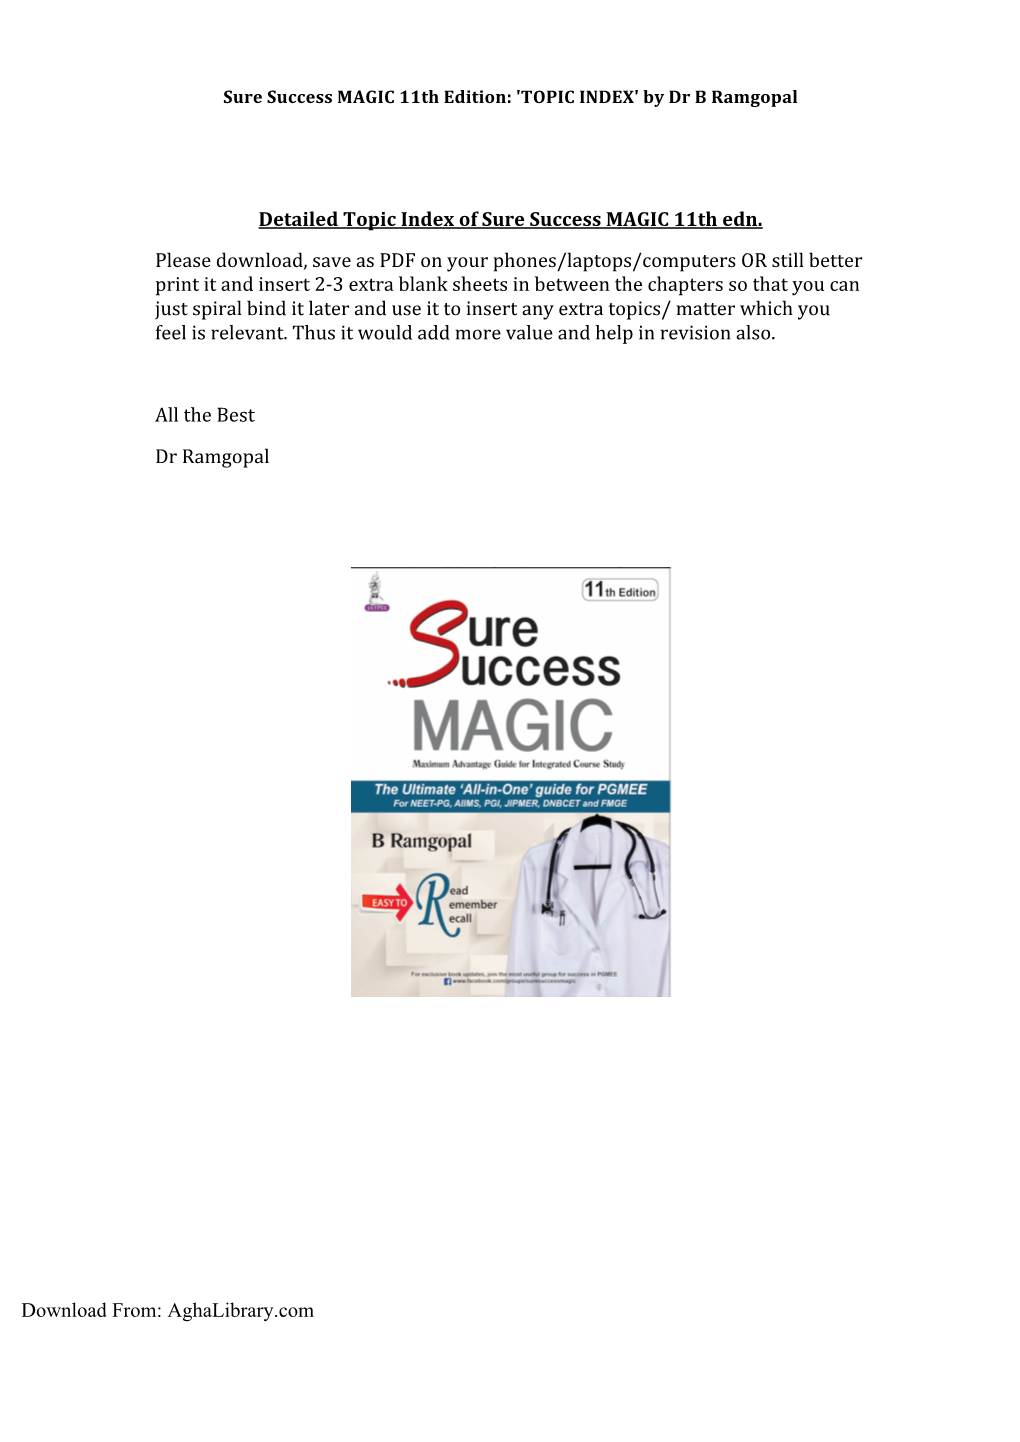 Detailed Topic Index of Sure Success MAGIC 11Th Edn. Please Download, Save As PDF on Your Phones/Laptops/Computers OR Still